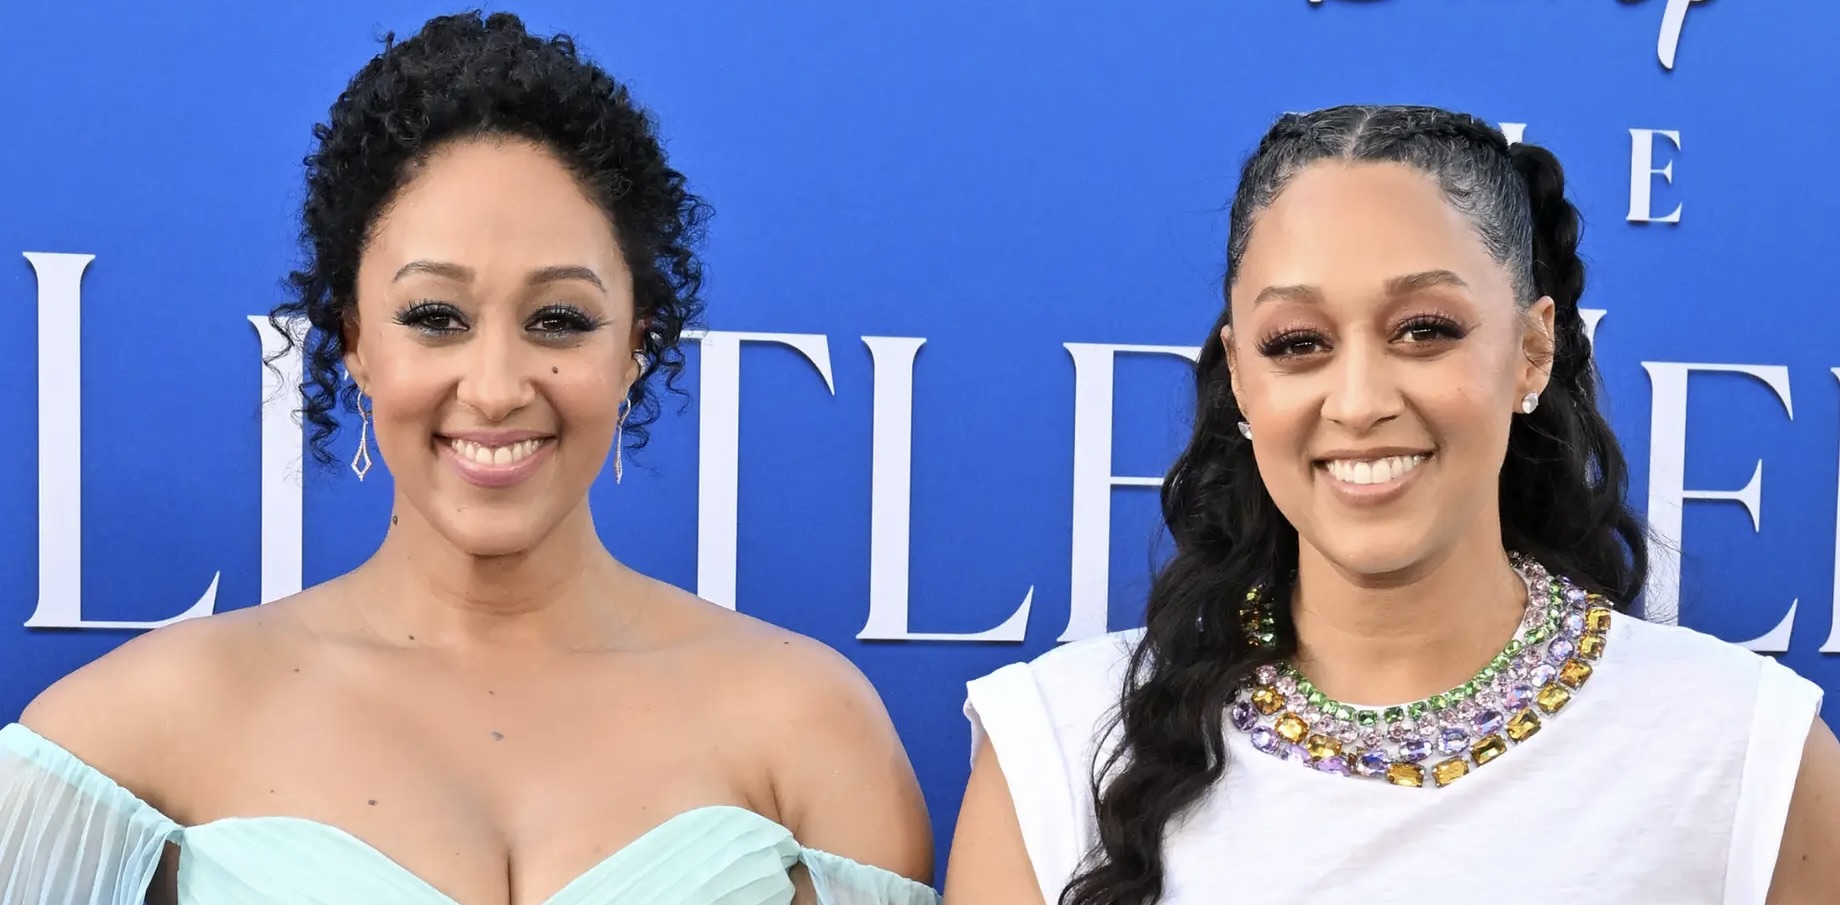 Tamera Mowry Ranks Songs With References to Her and Sister Tia in the Lyrics [Video]